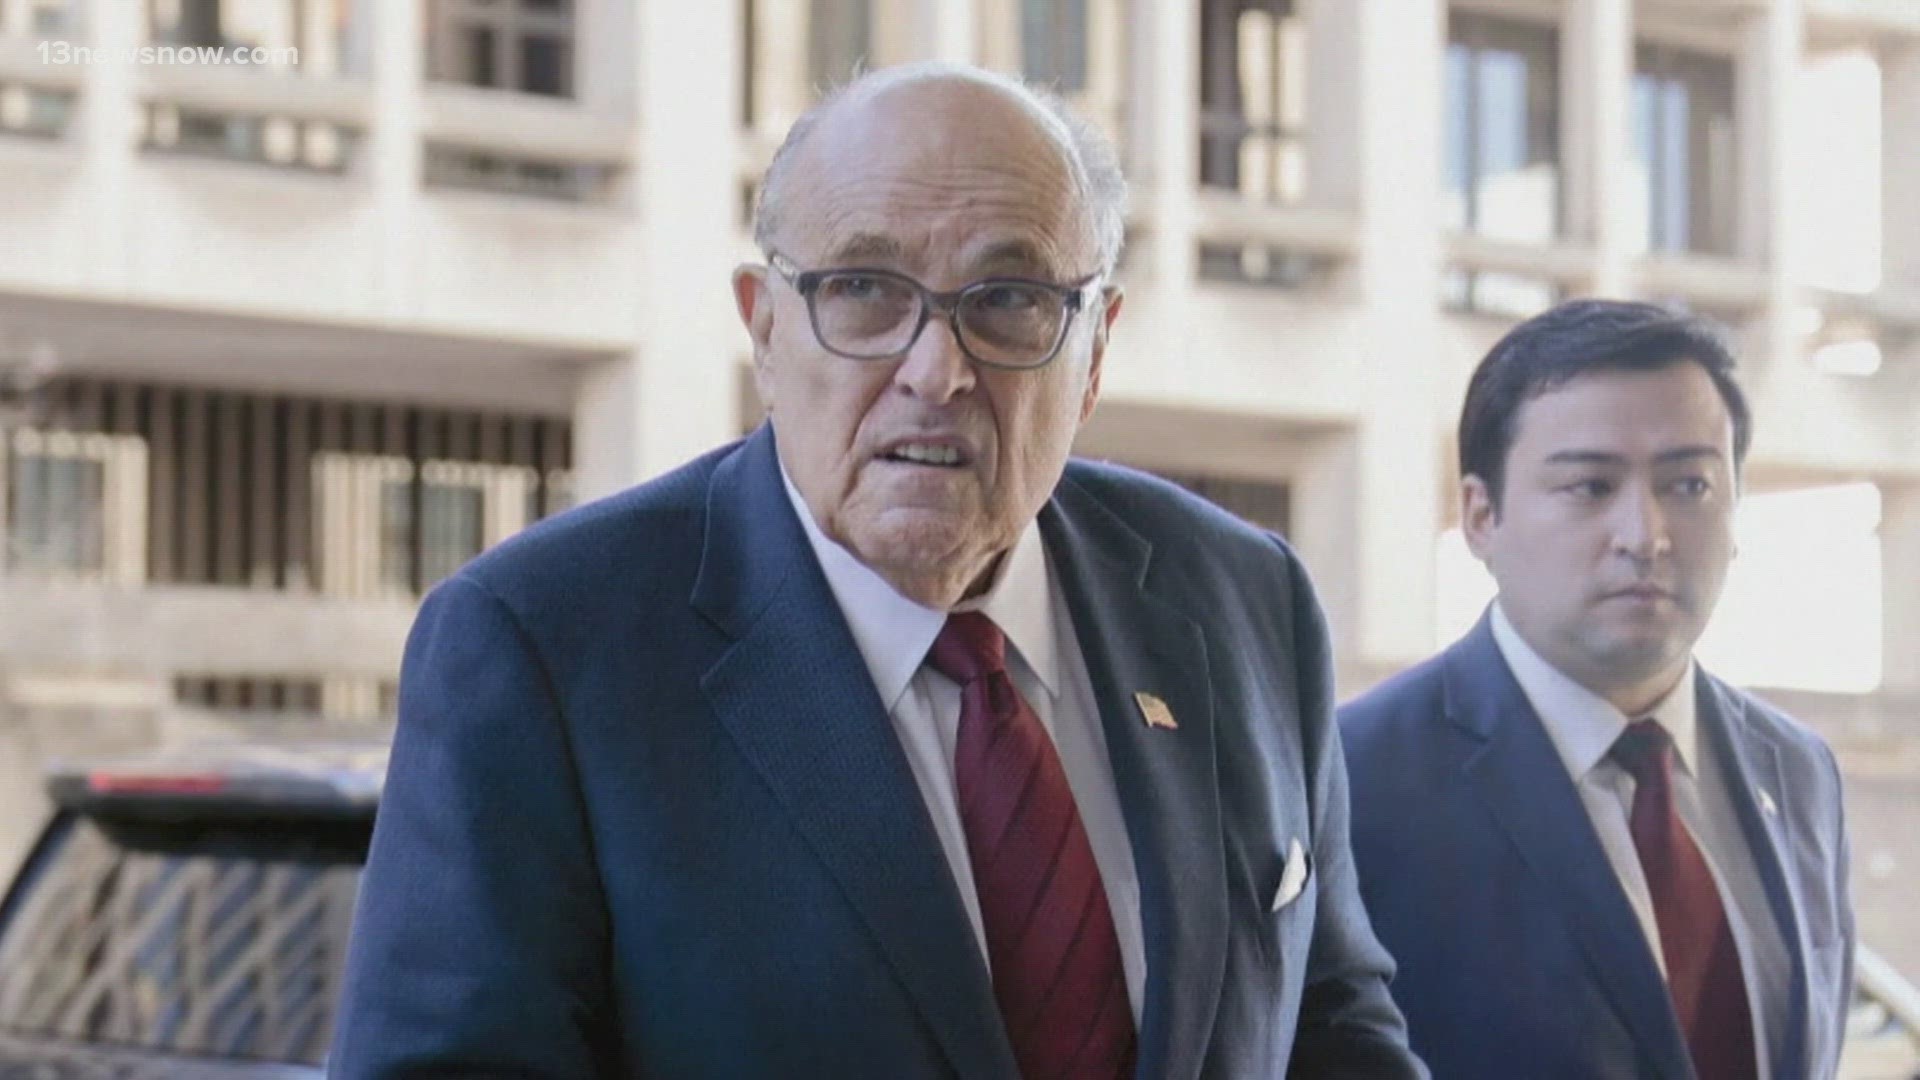 A jury awarded $148 million in damages to two former election workers in Georgia who sued Rudy Giuliani for defamation.